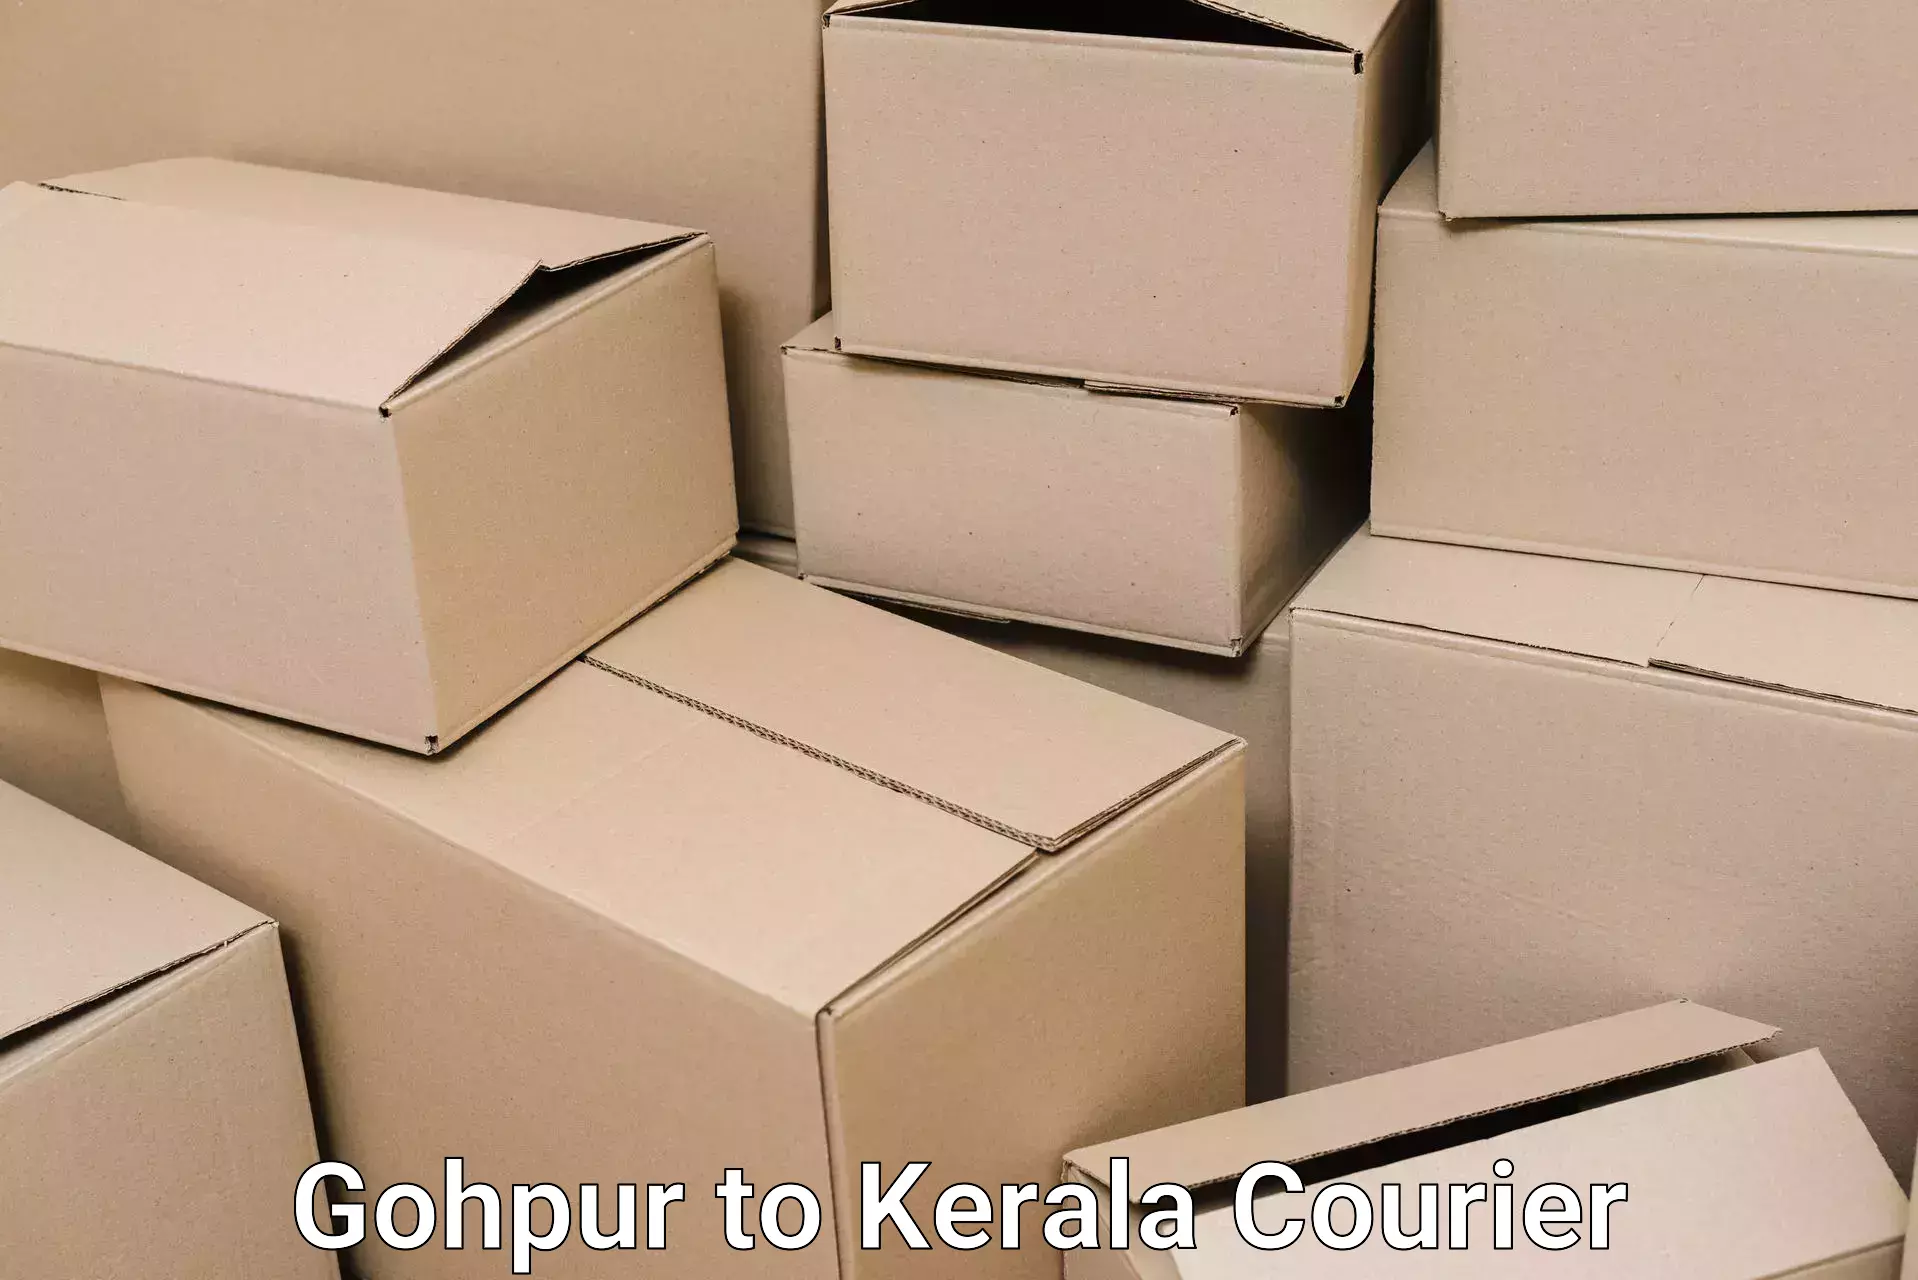 Efficient moving and packing Gohpur to Cochin